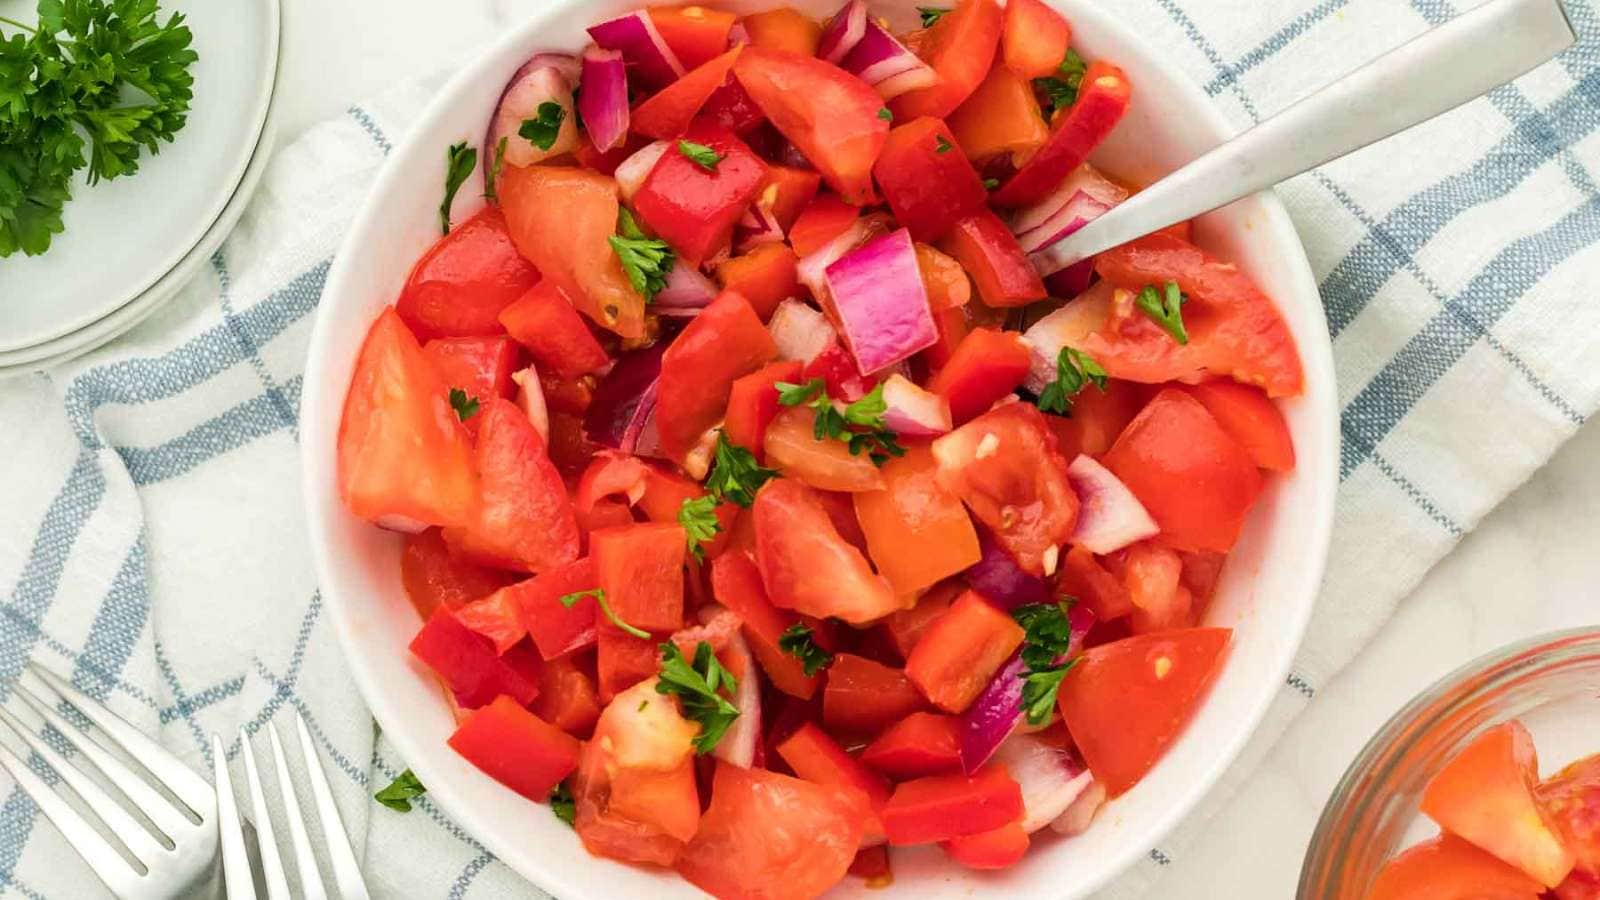 Tomato Salad recipe by Cheerful Cook.